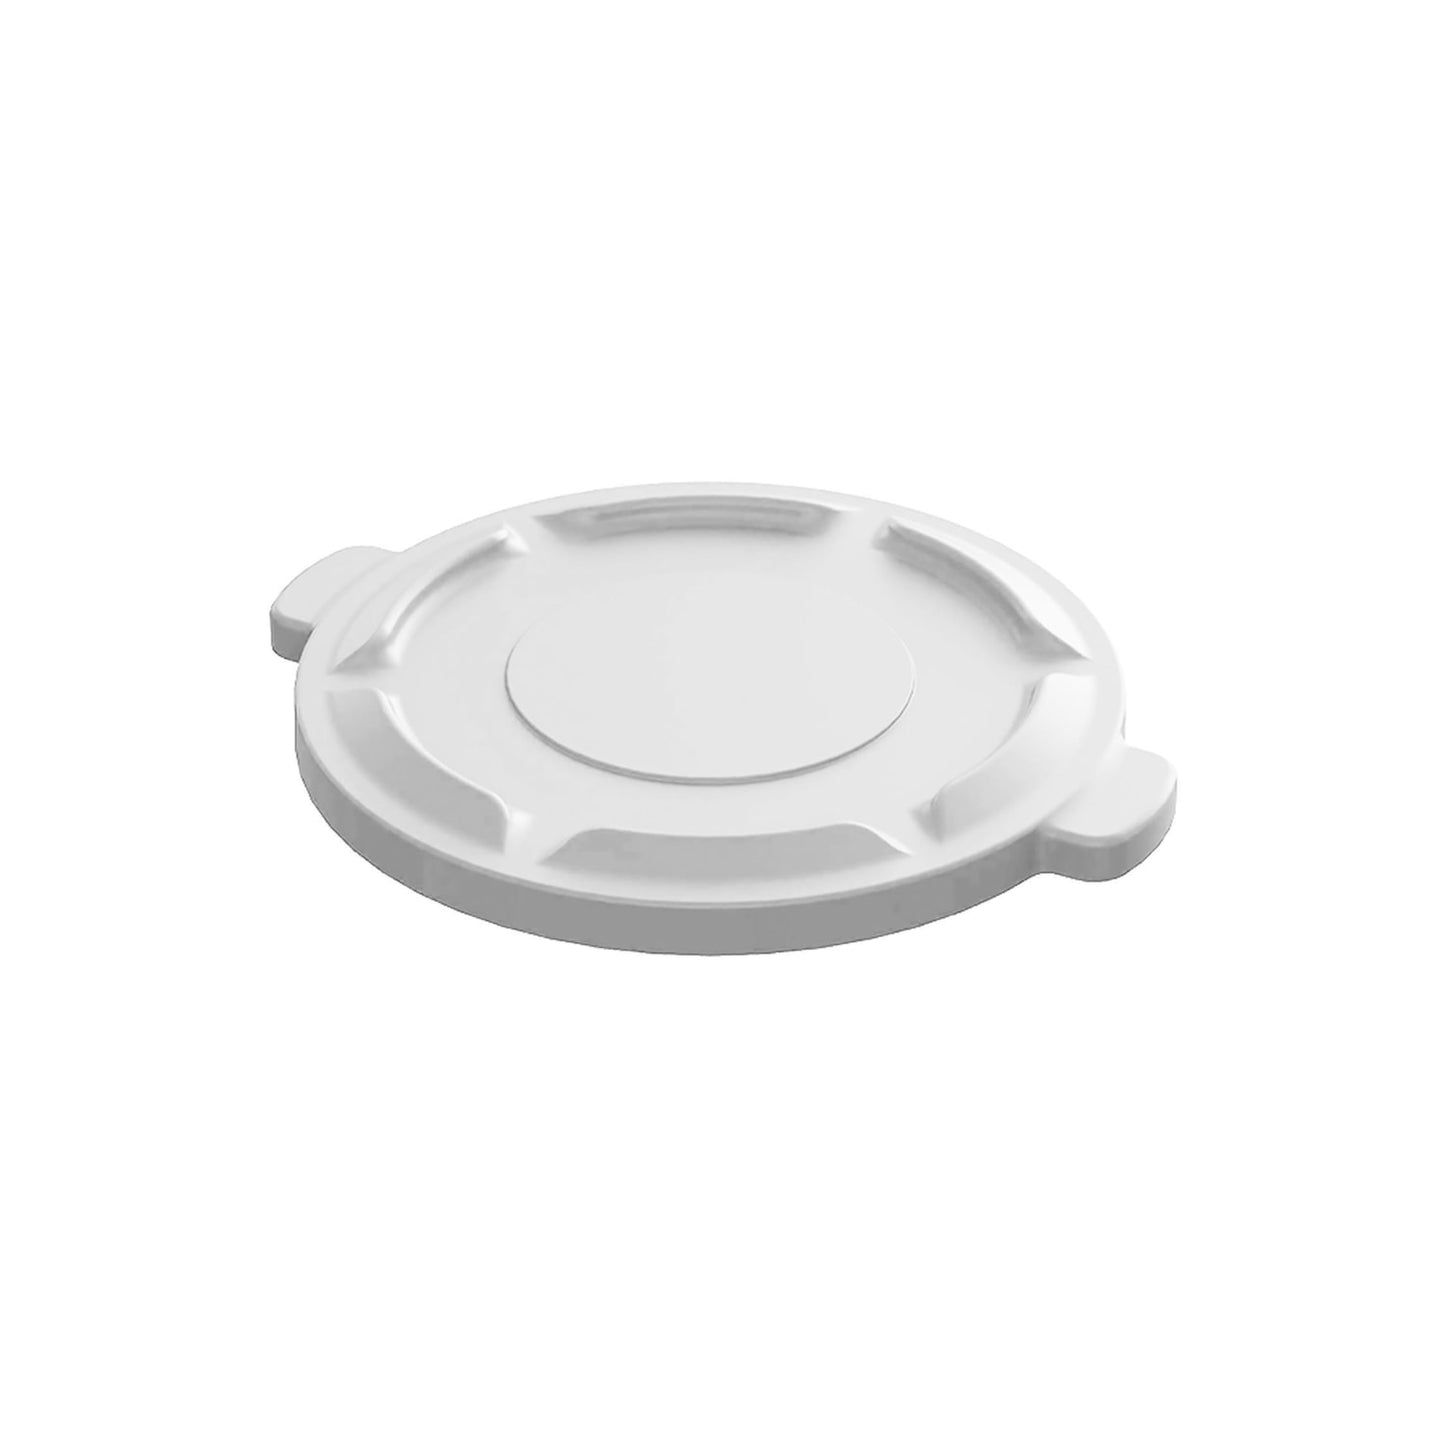 10 gal Container Lid White - 9611W